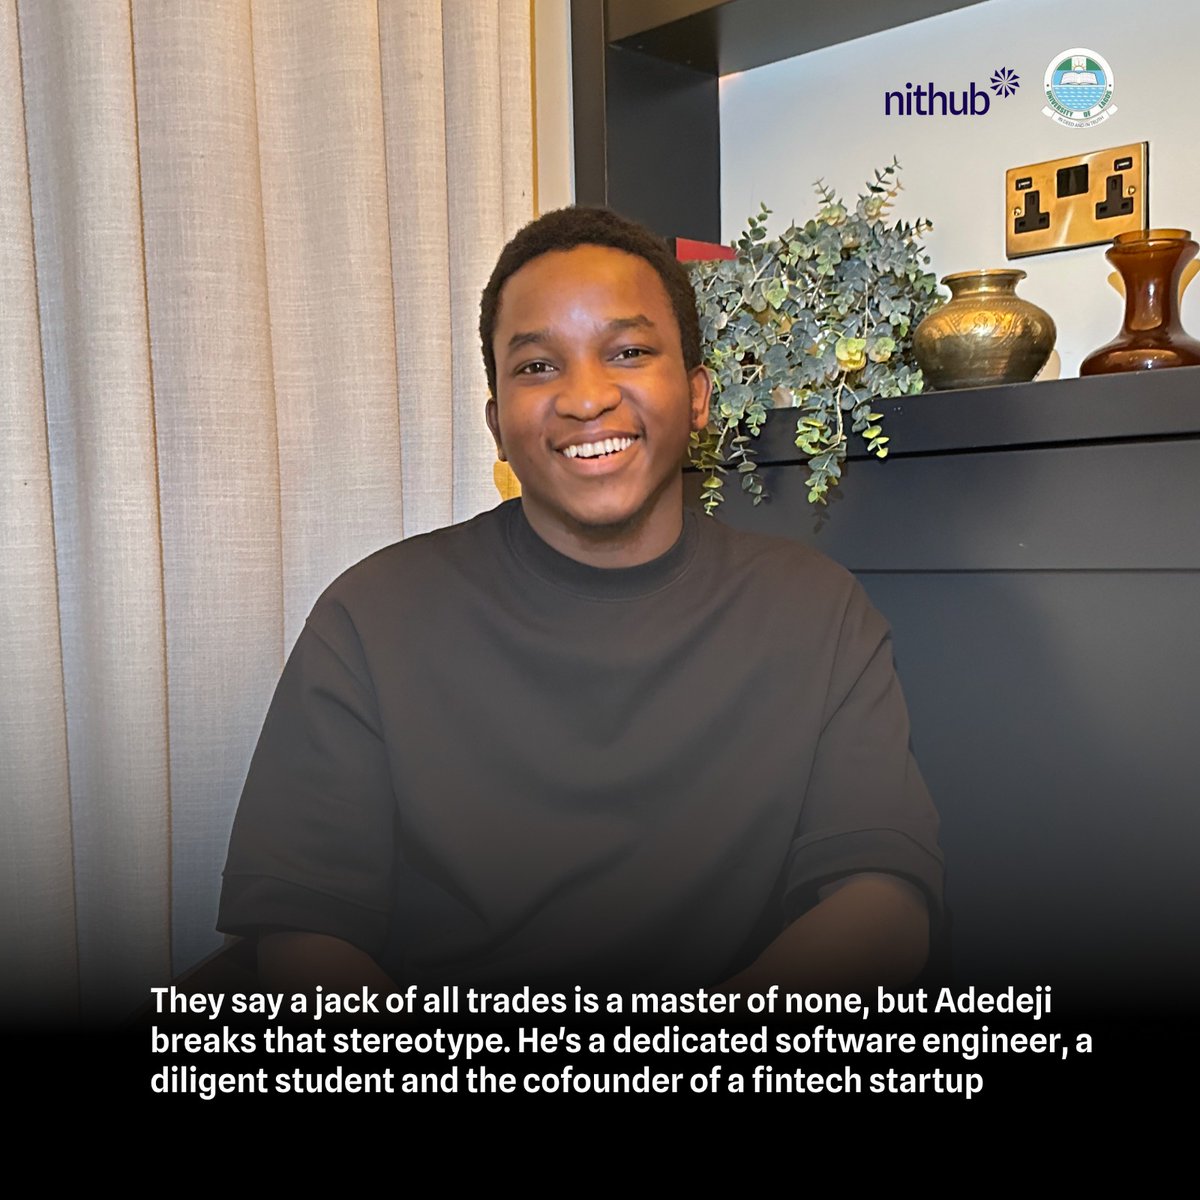 Meet one of the pioneer members of Nithub. Adedeji is a Software Engineer, 500 level Computer Science student at unilag, two-time intern at JP Morgan chase & co. and now a co-founder of a fintech start-up. You can read about his inspiring journey here nithub.unilag.edu.ng/spotlight-on-a…